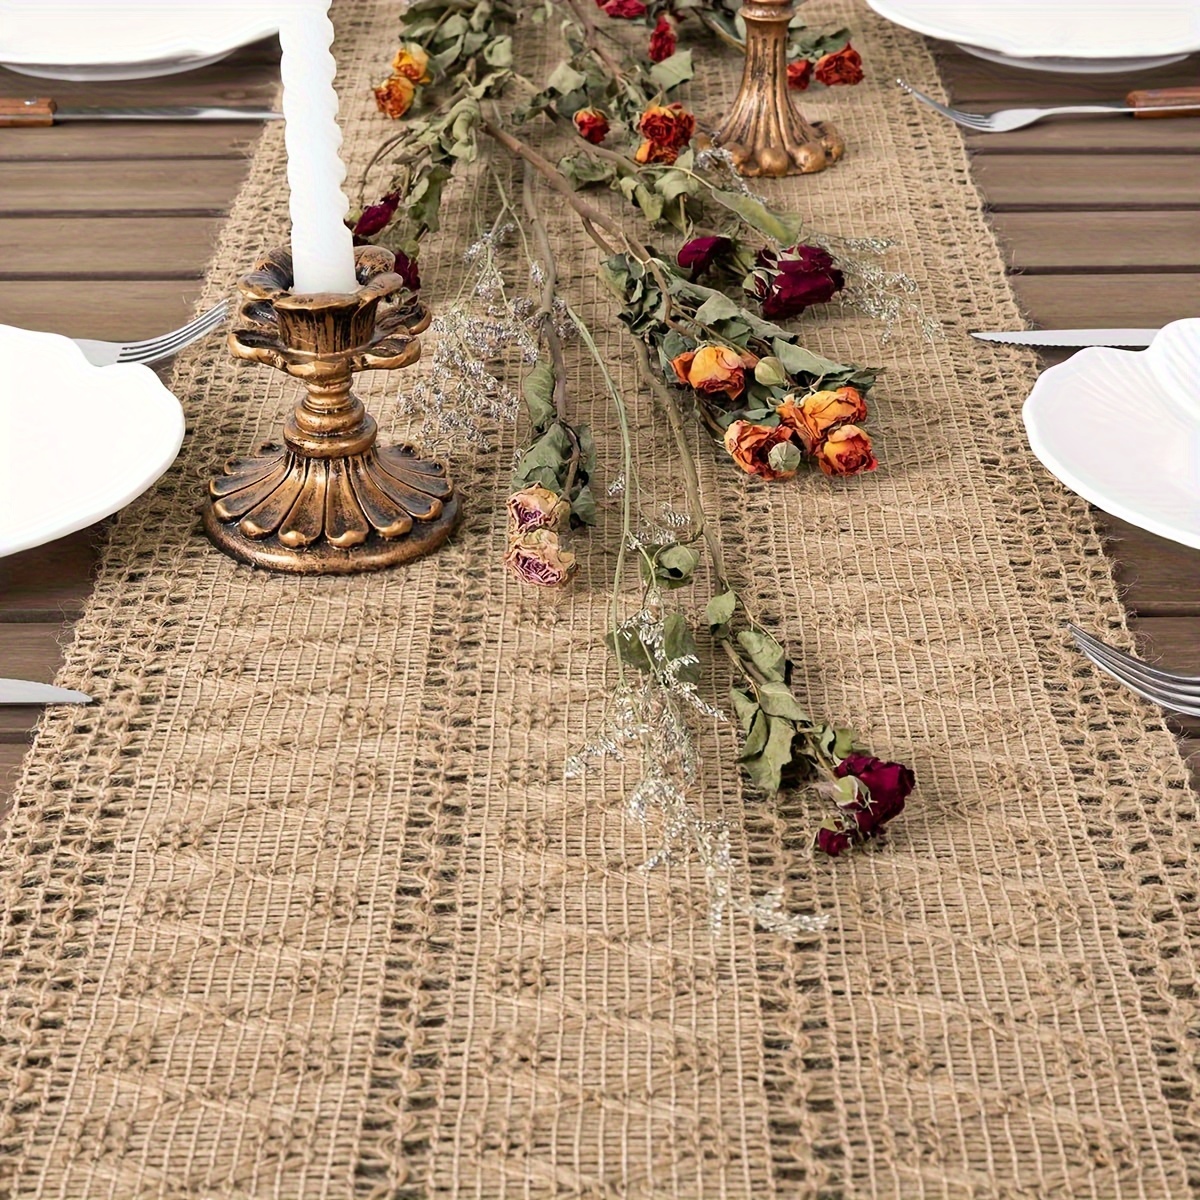 

Boho Chic Burlap Table Runner With Lace Trim - Rustic Farmhouse Style, Perfect For Home Decor, Dining, Fall, Thanksgiving, Christmas, Bridal Showers - 13" X 48" Brown